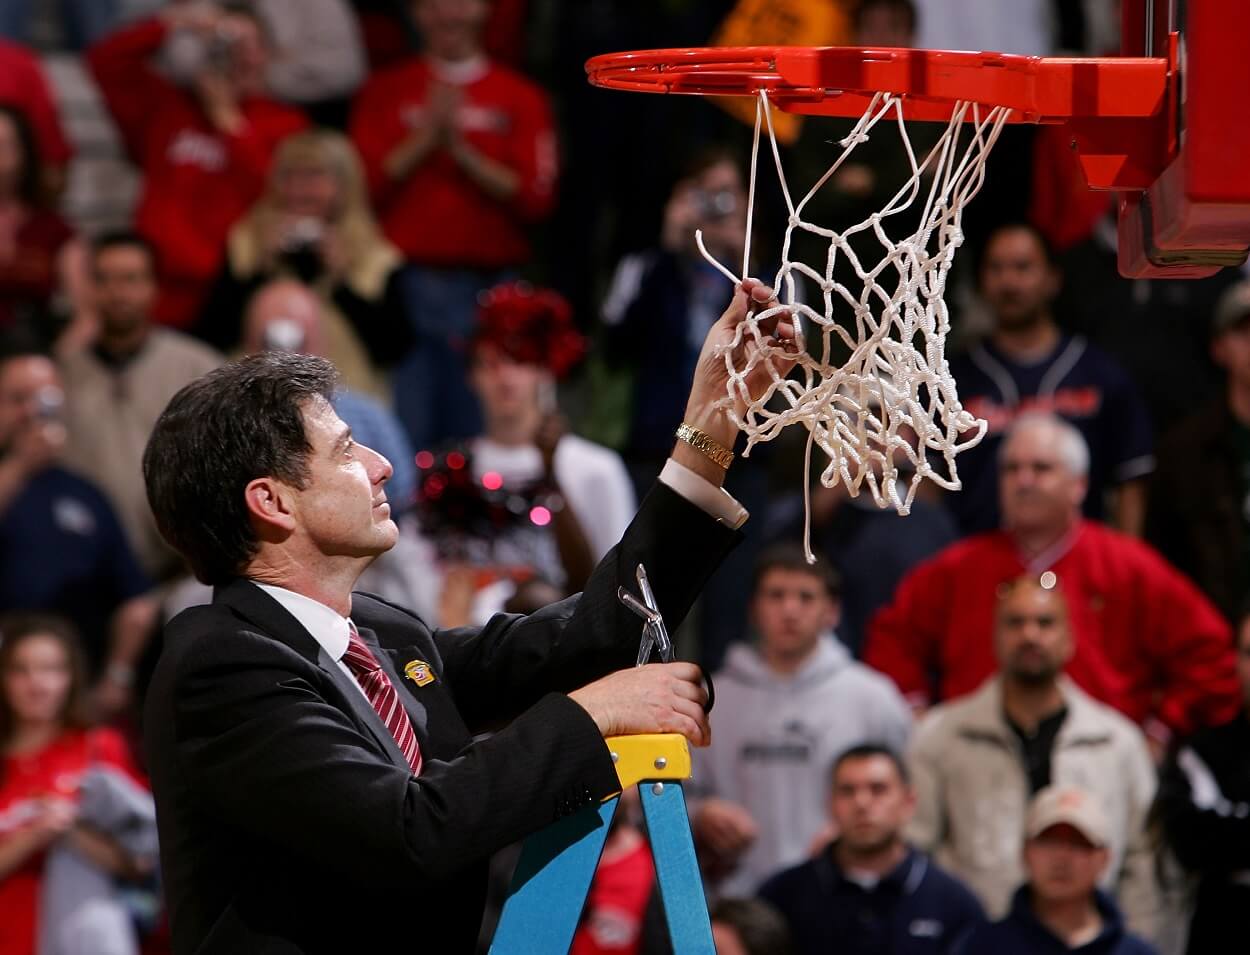 Rick Pitino cuts down the net after the Louisville Cardinals' victory over the West Virginia Mountaineers in overtime during the Elite 8 game of the NCAA Division I Men's Basketball Tournament on March 26, 2005